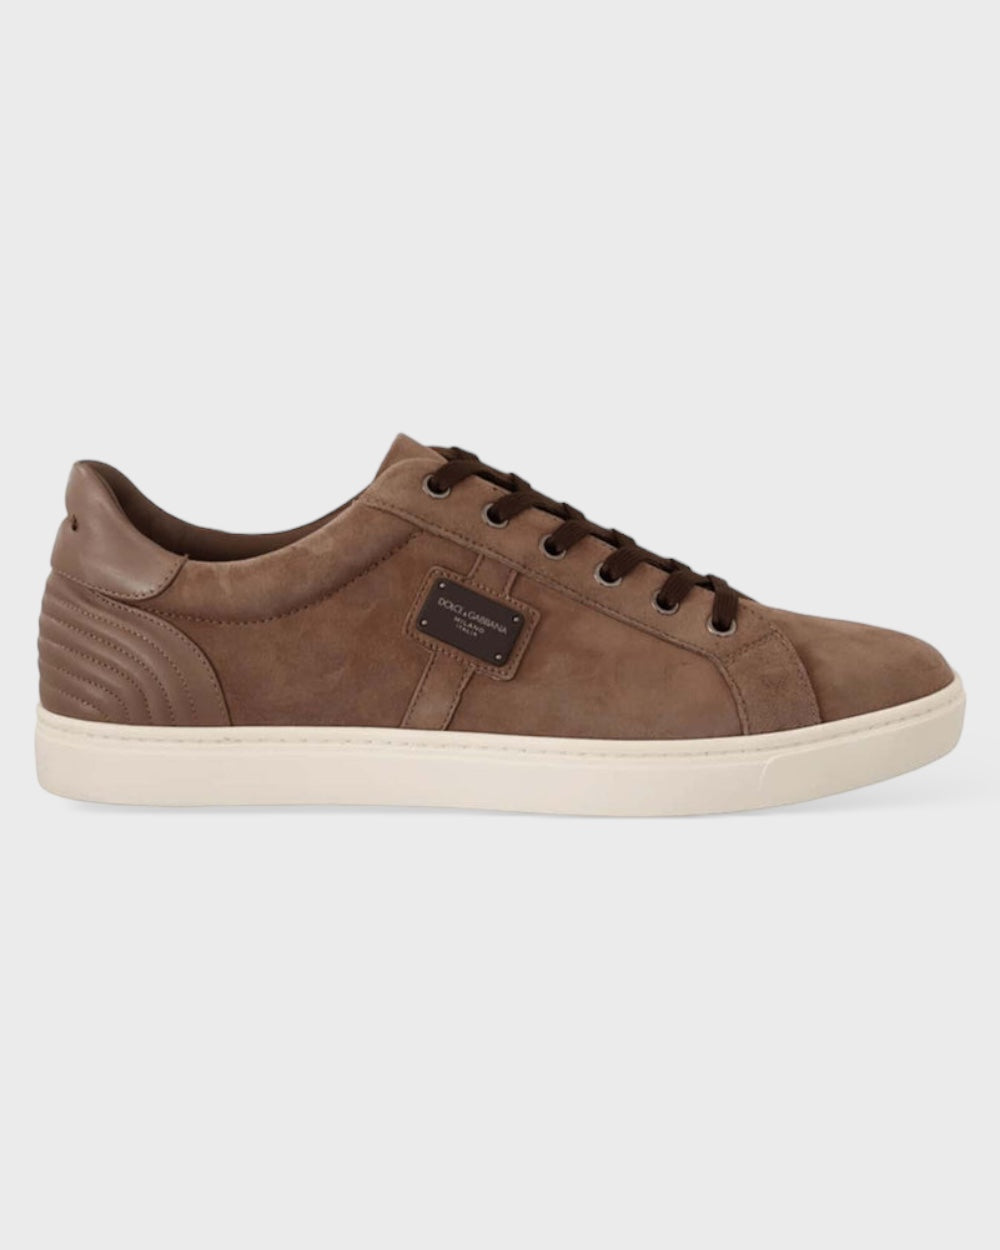 Dolce & Gabbana Brown Suede Leather Sneakers Shoes